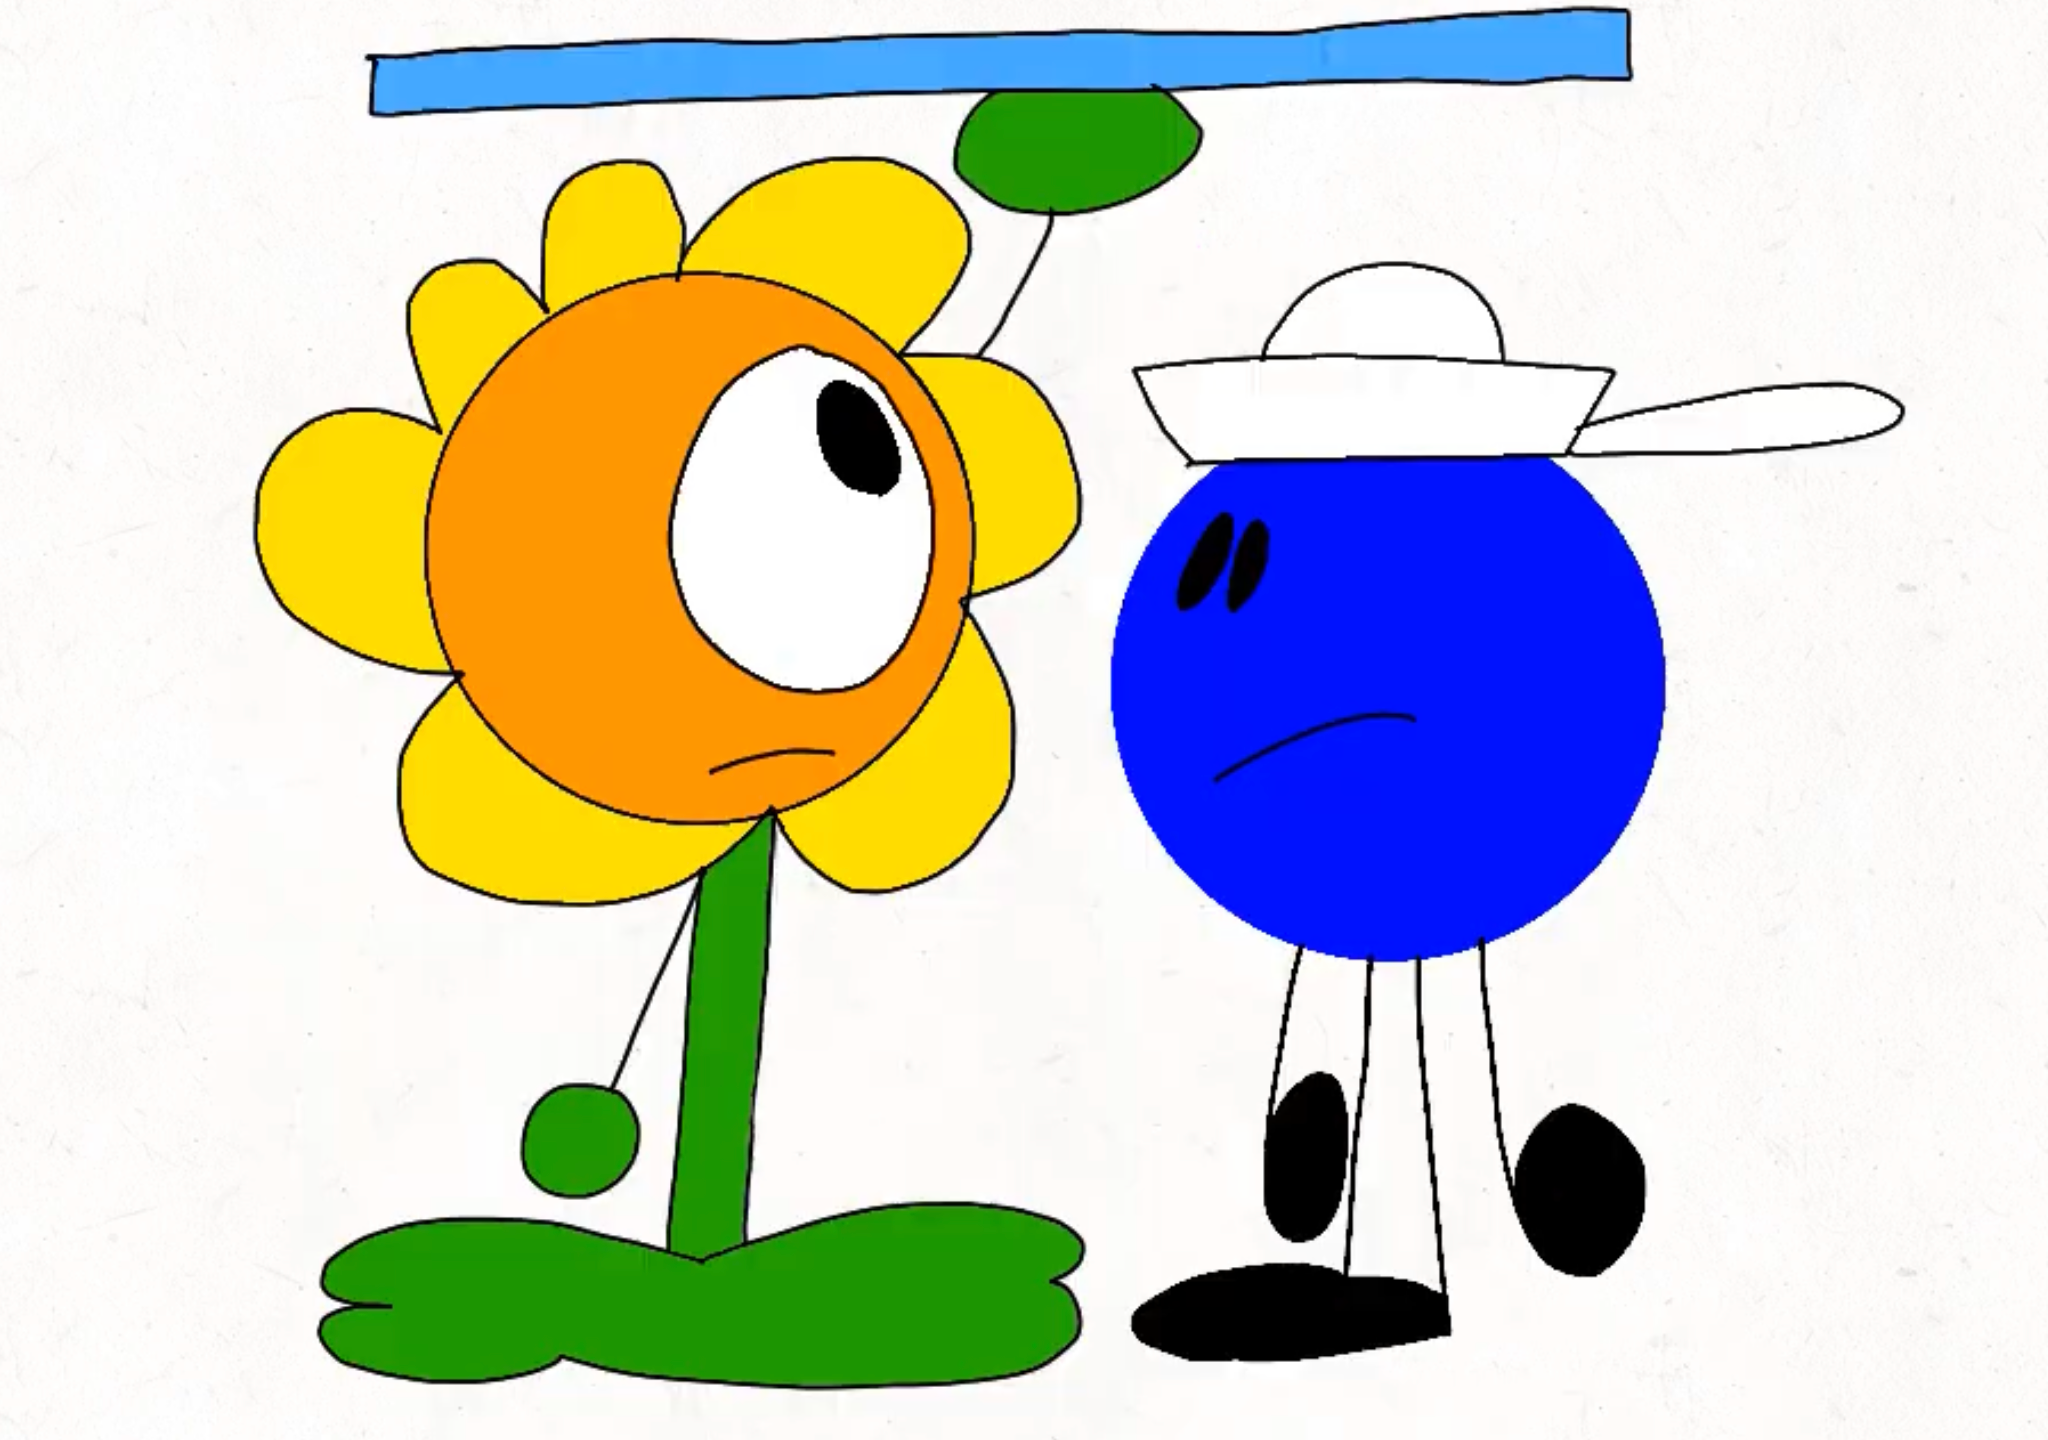 Blue Circle And Sunflower sheltering Blank Meme Template